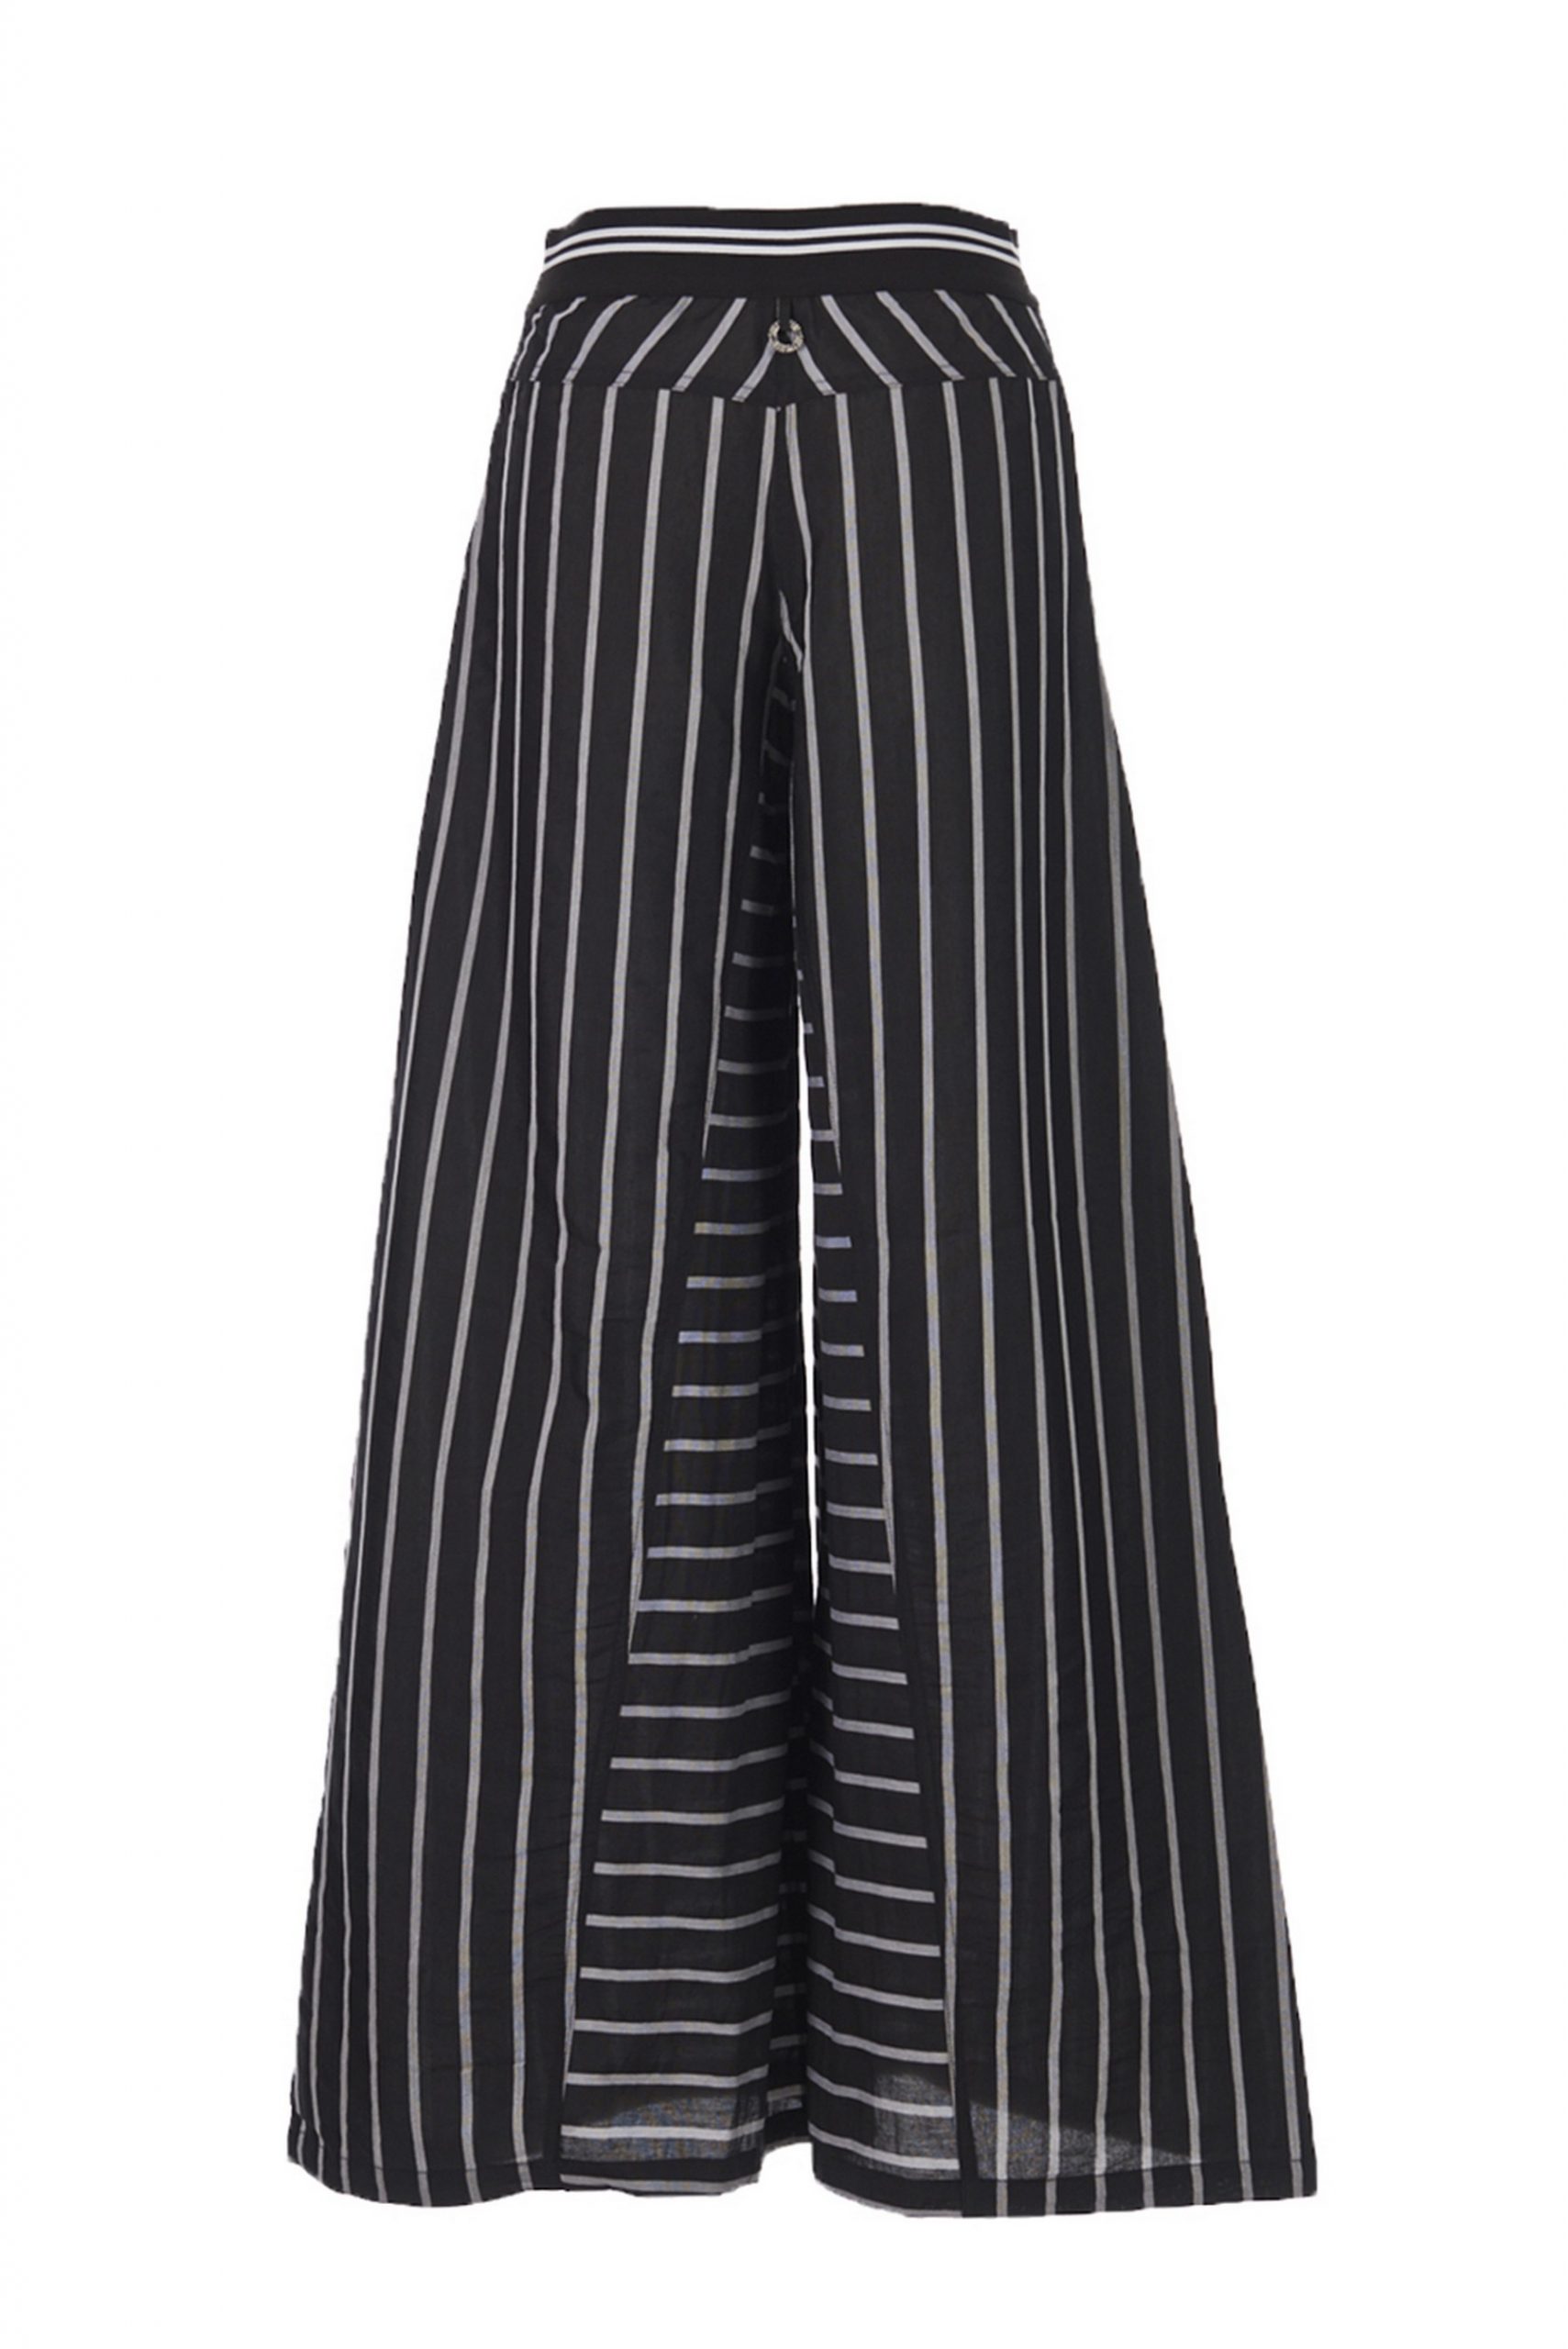 Pinstripe palazzo pants - Save The Queen!